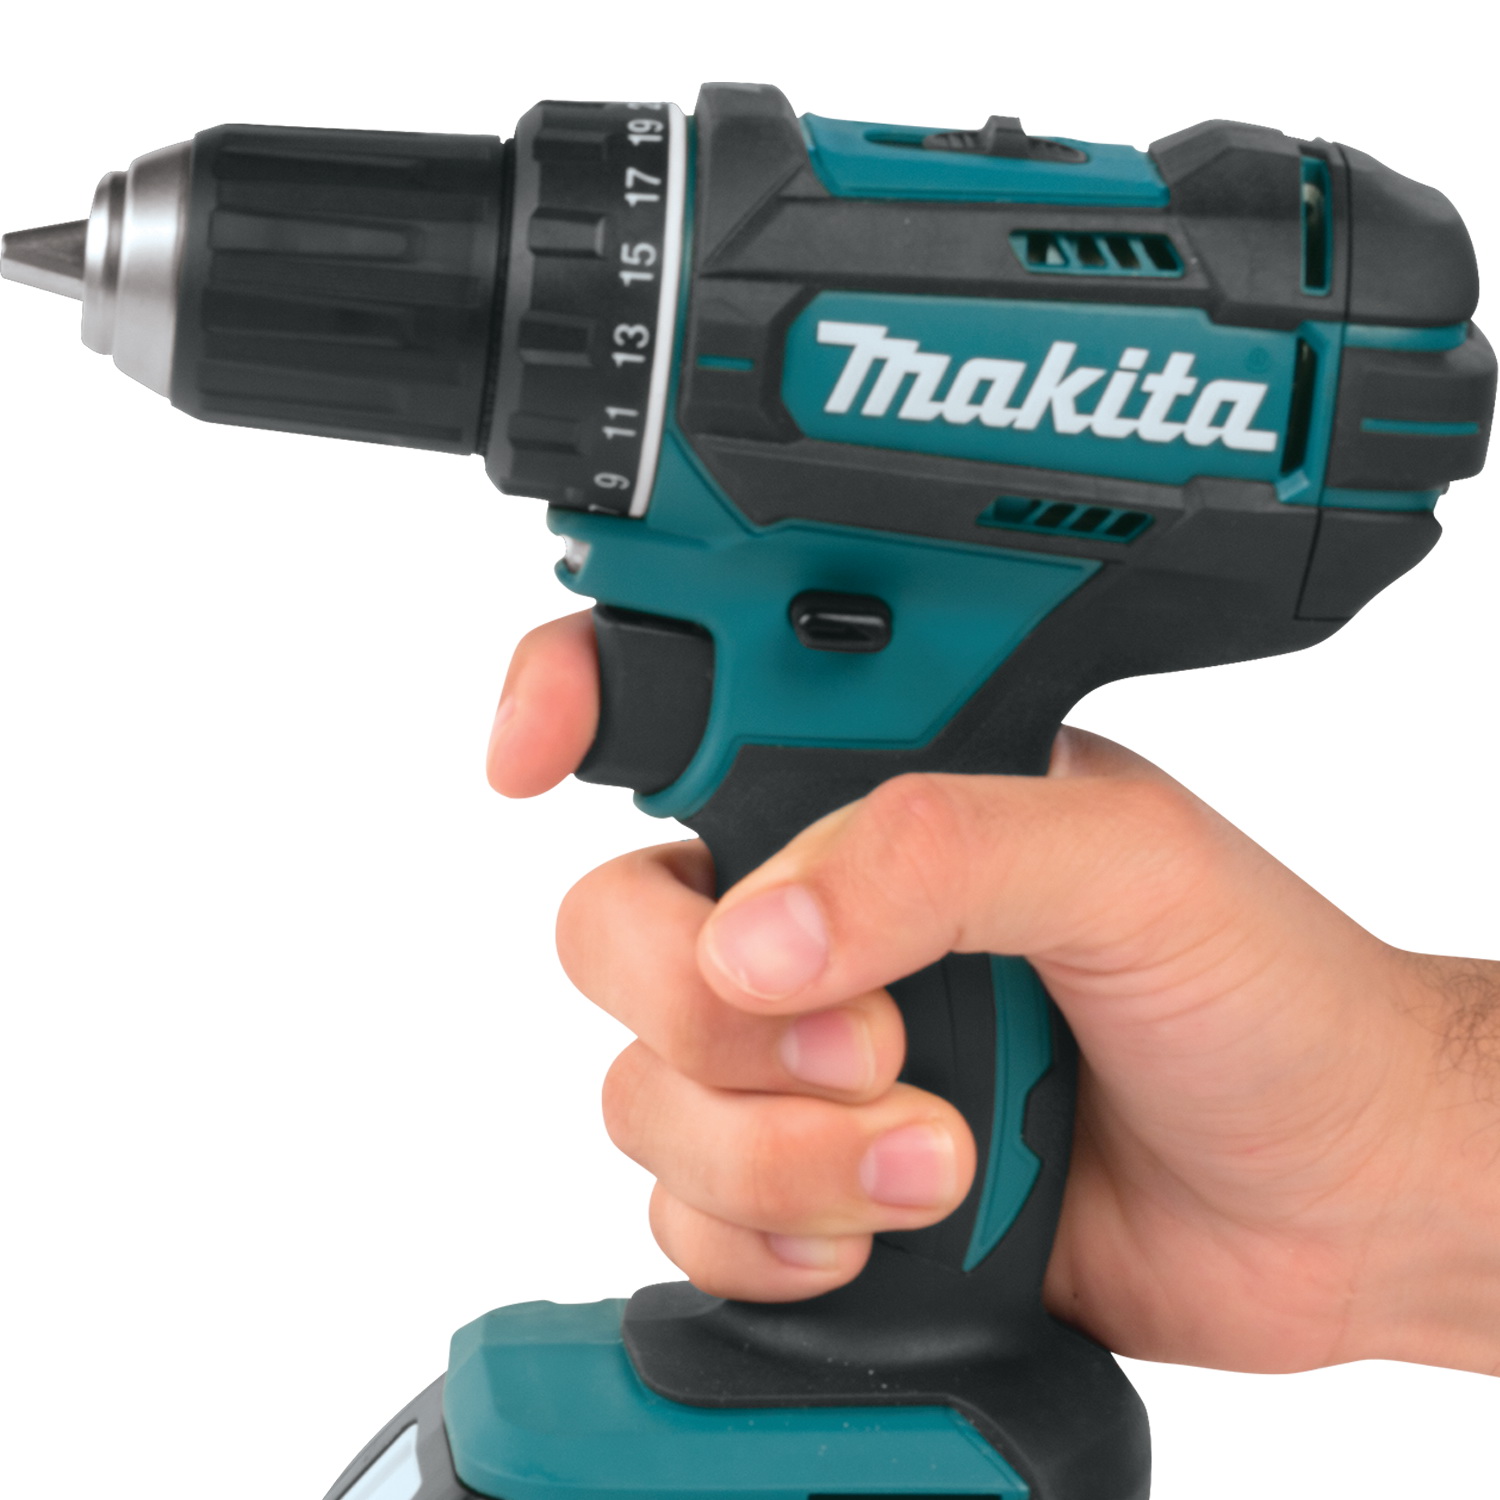 Makita LXT Series XFD10Z Drill Driver, Tool Only, 18 V, 1/2 in Chuck, Ratcheting Chuck - 4